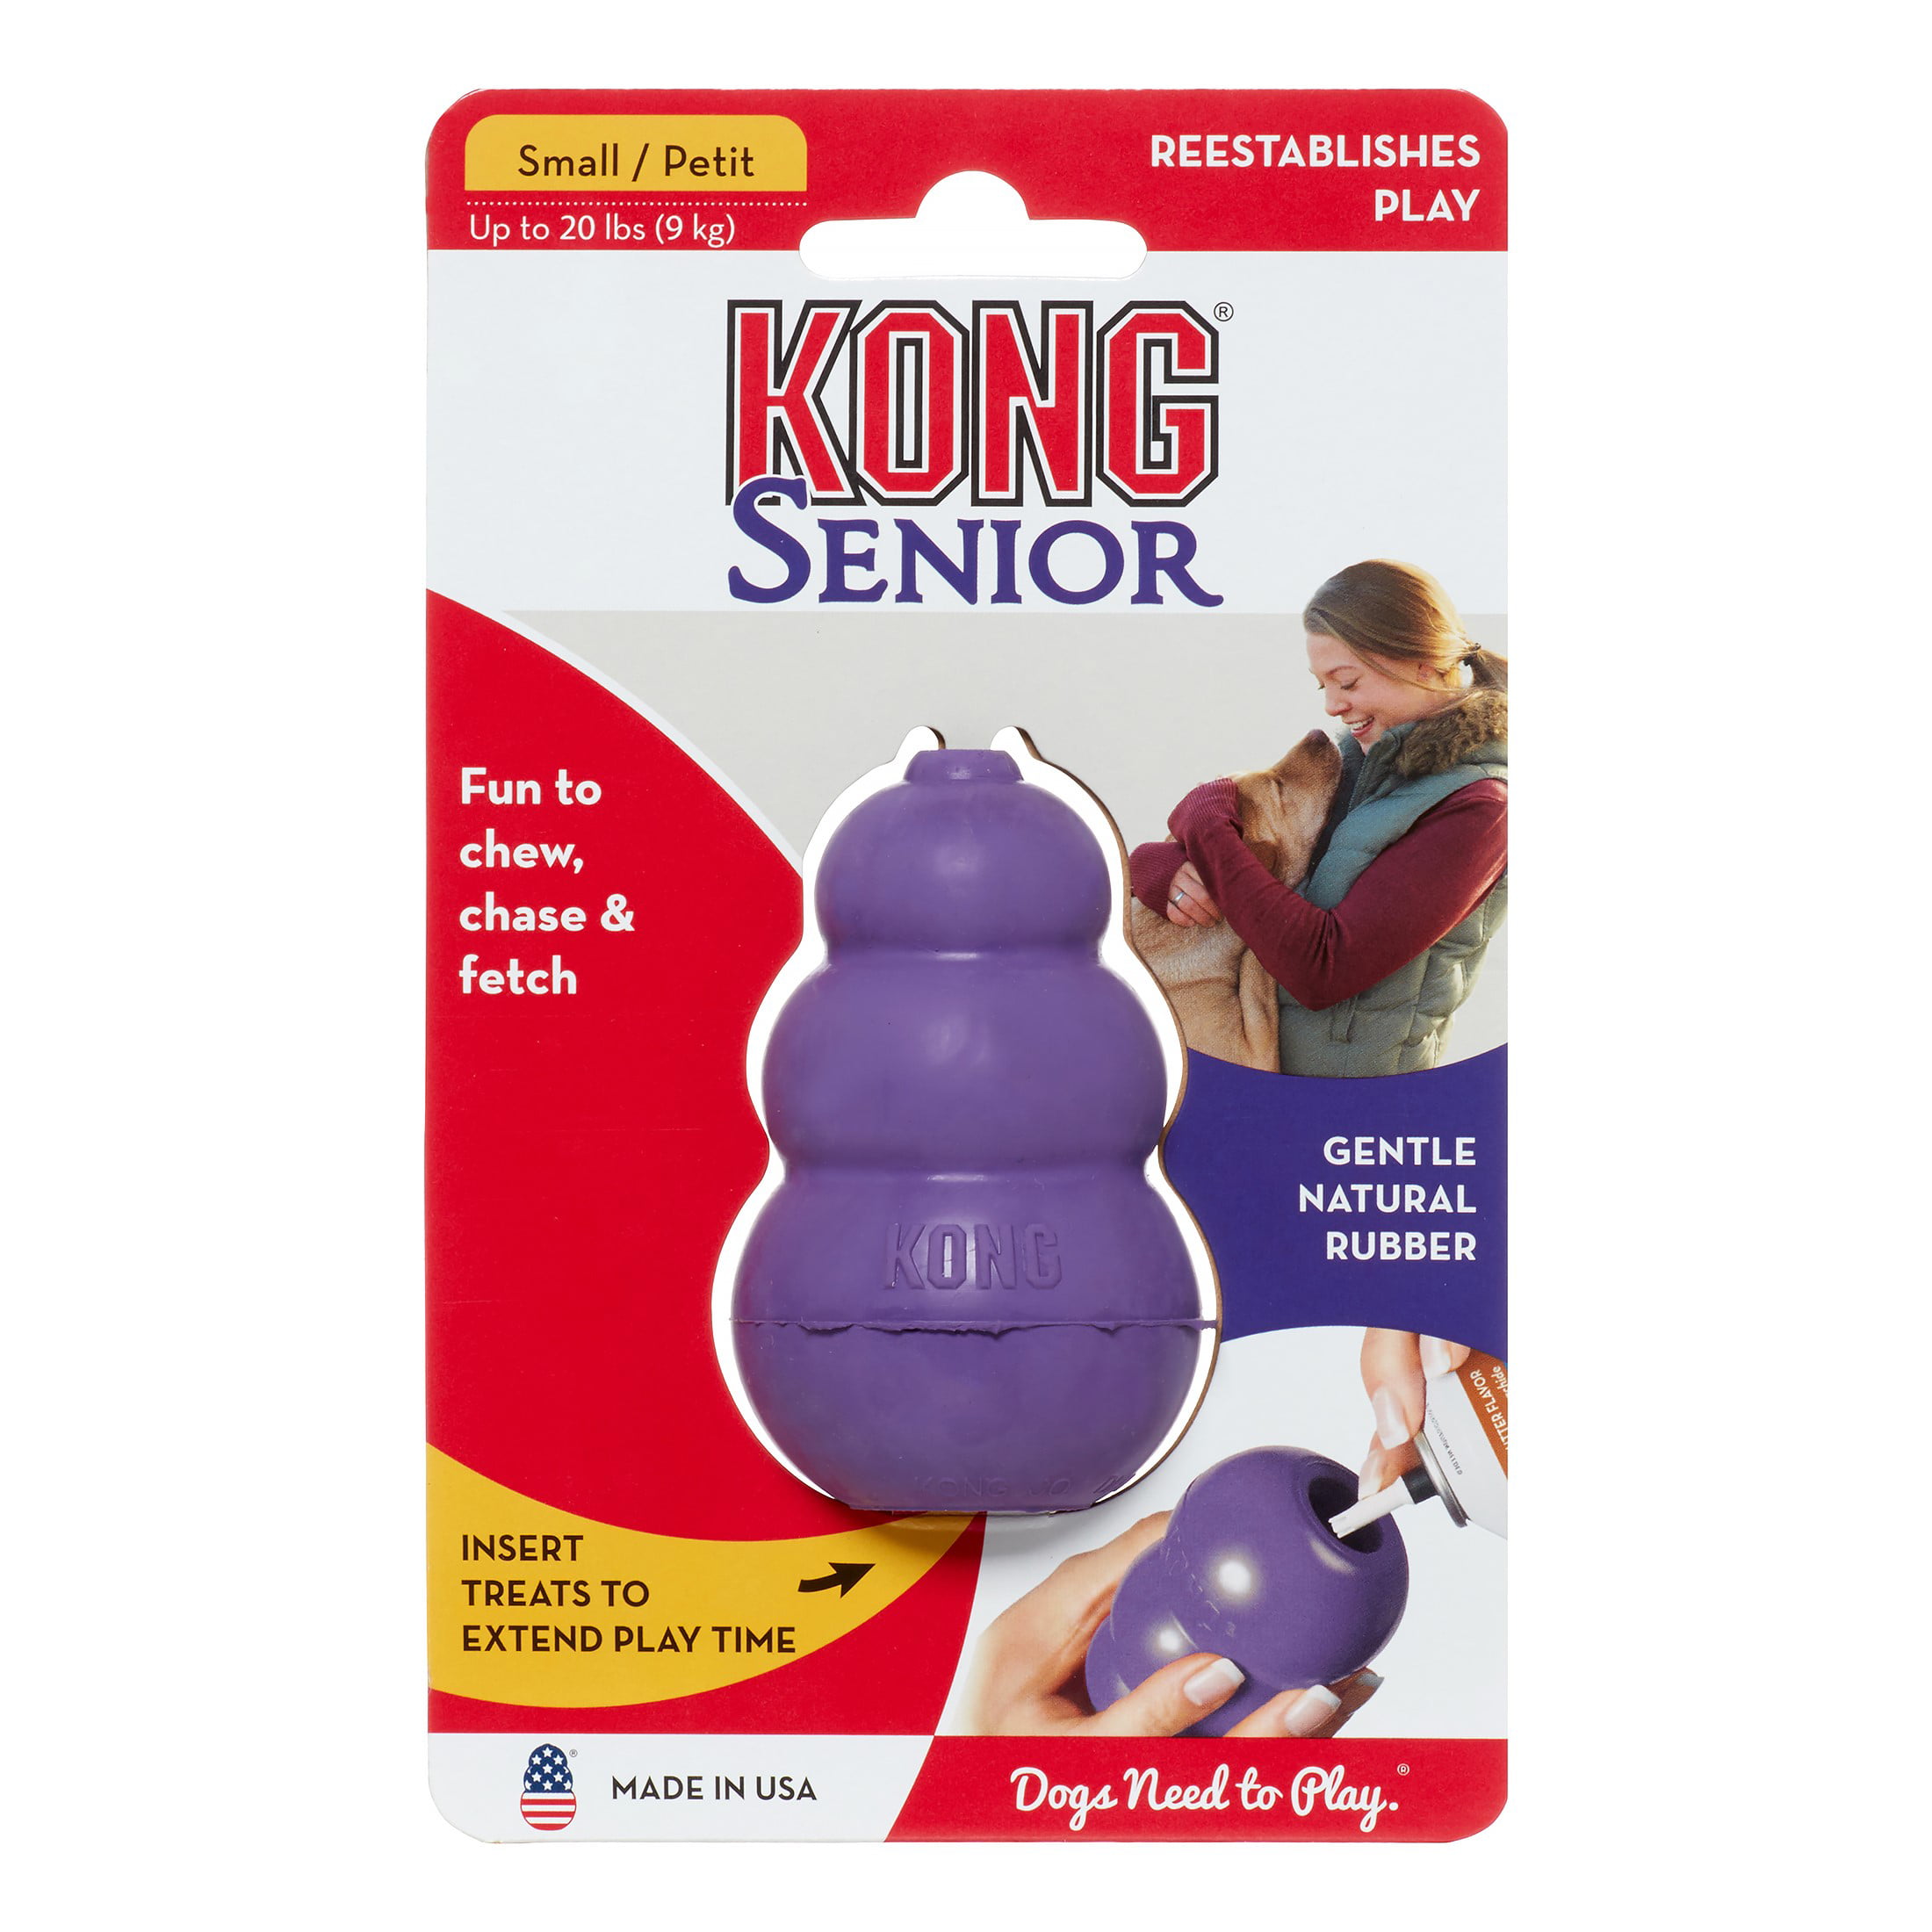 KONG Classic Dog Toy, Medium  R&R Pet Lifestyle and Supply